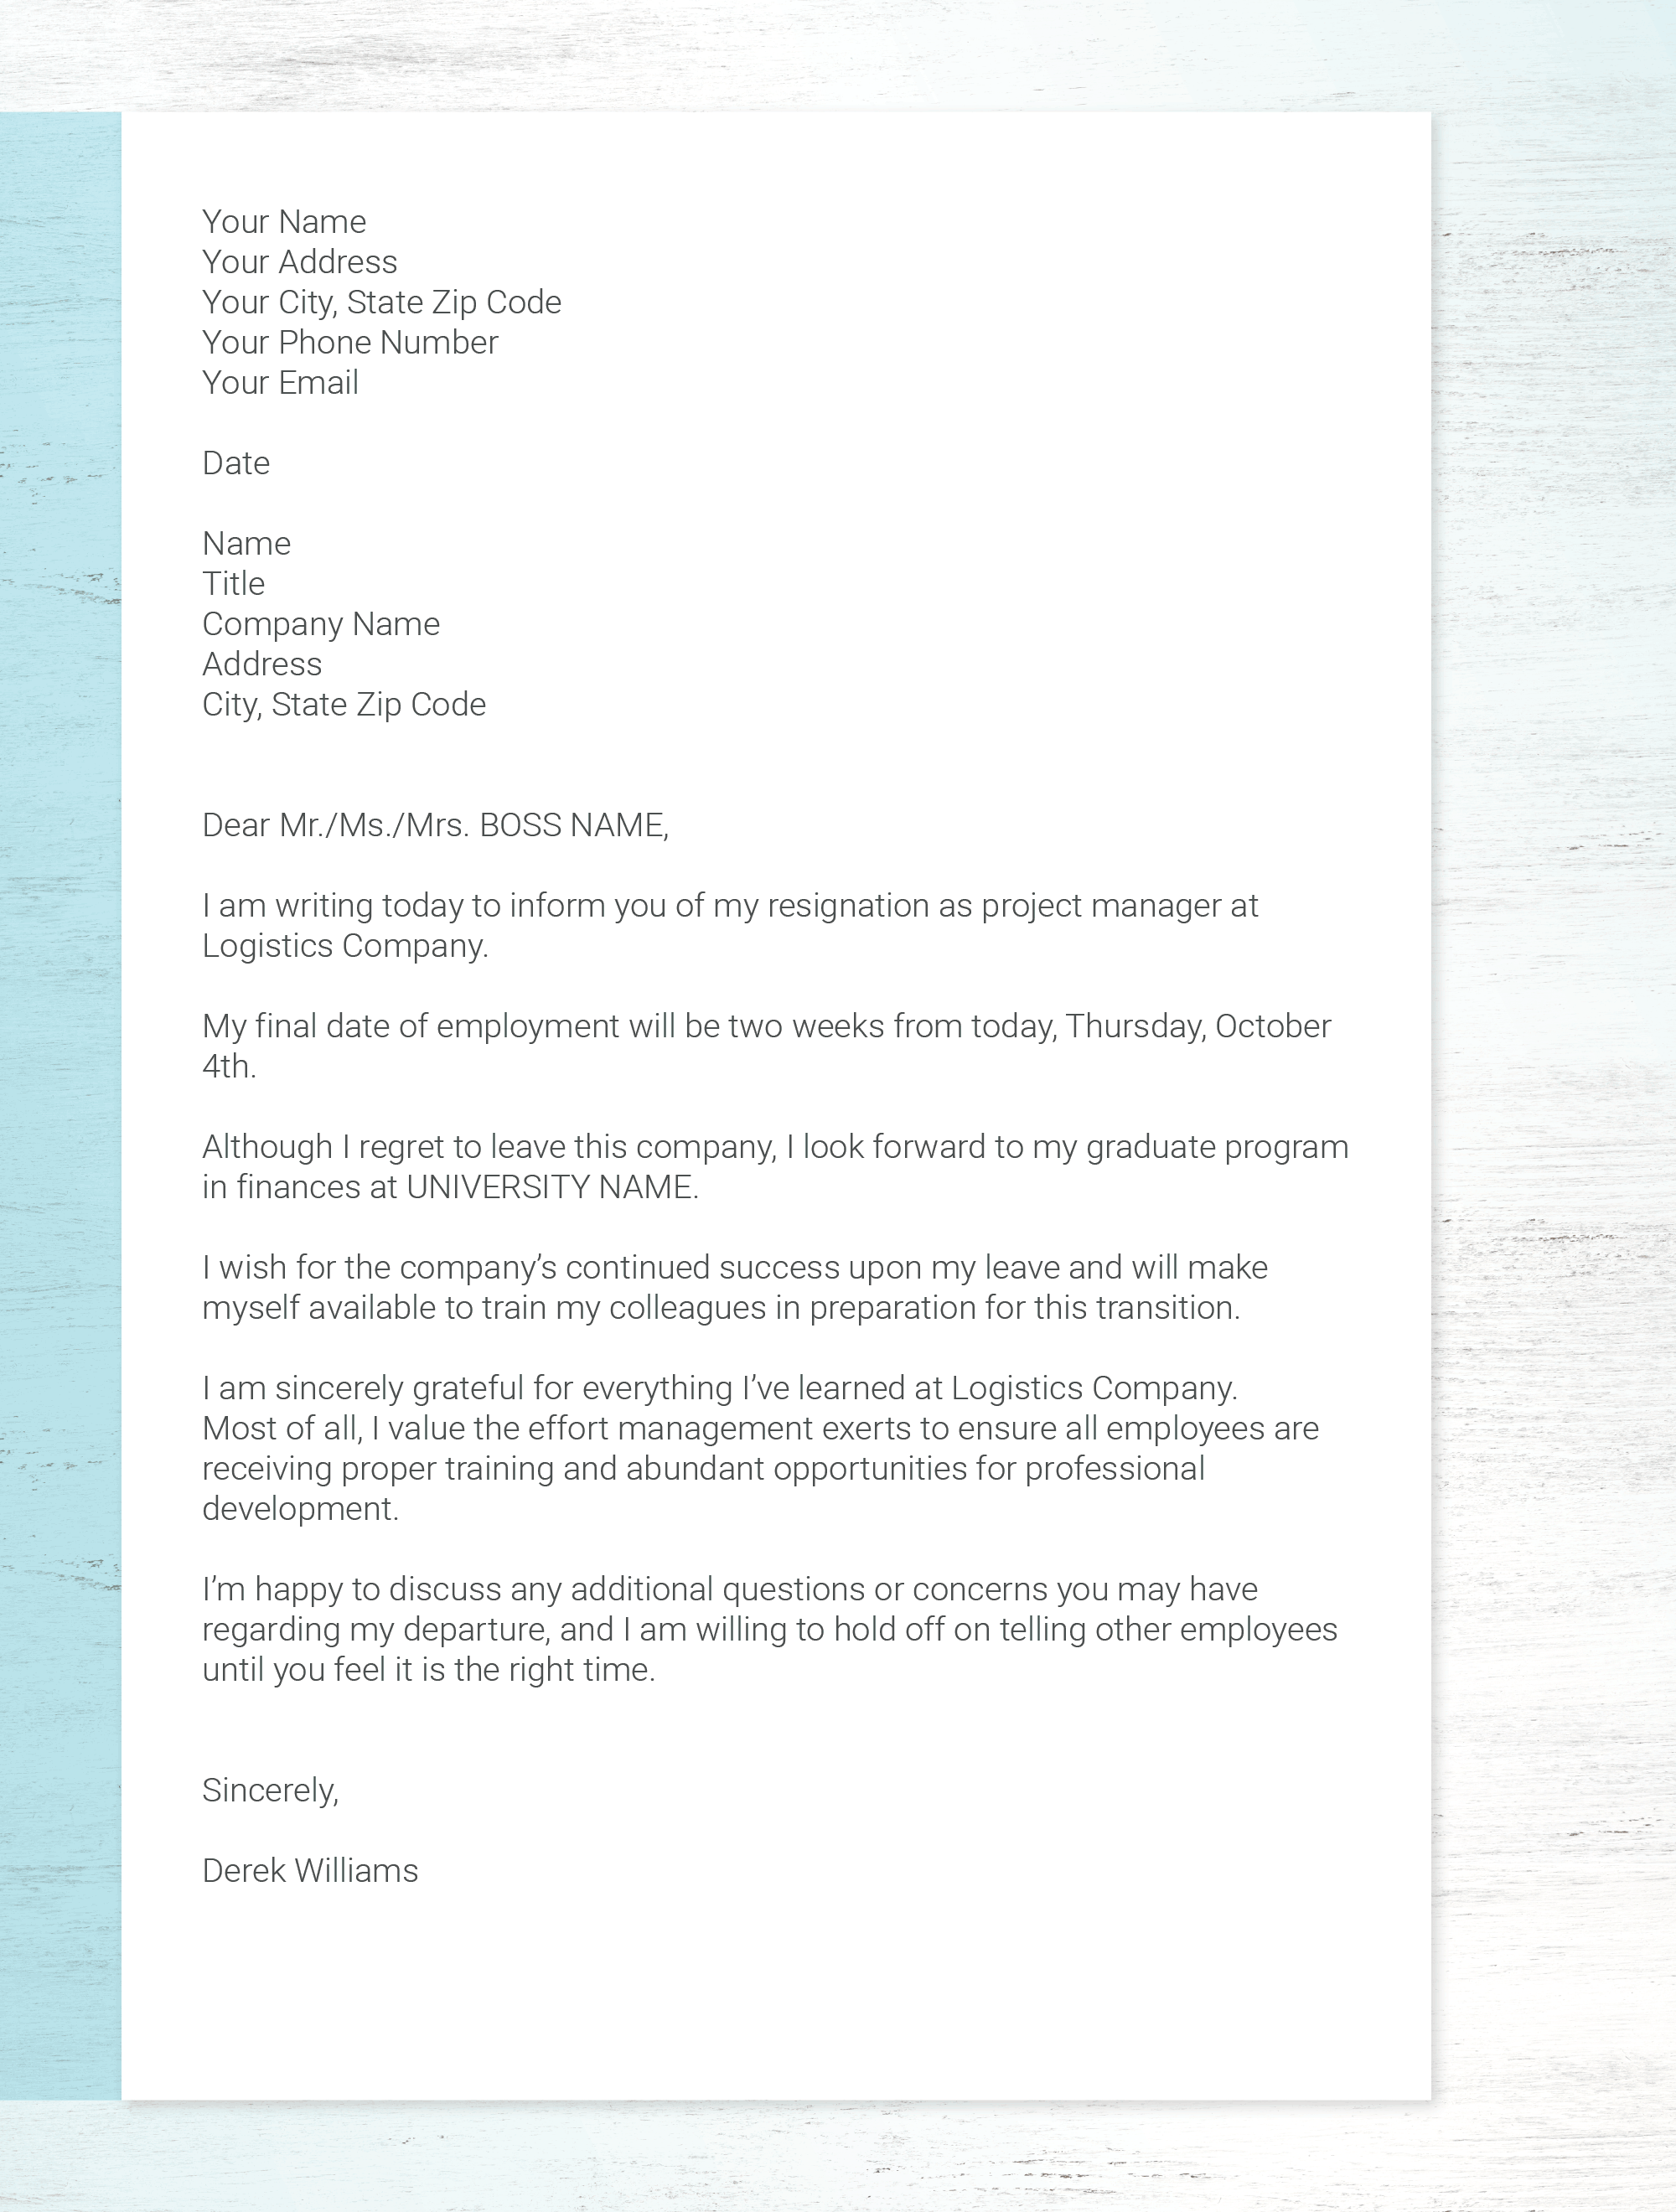 Letter Asking For Job Back After Being Fired from learn.g2.com